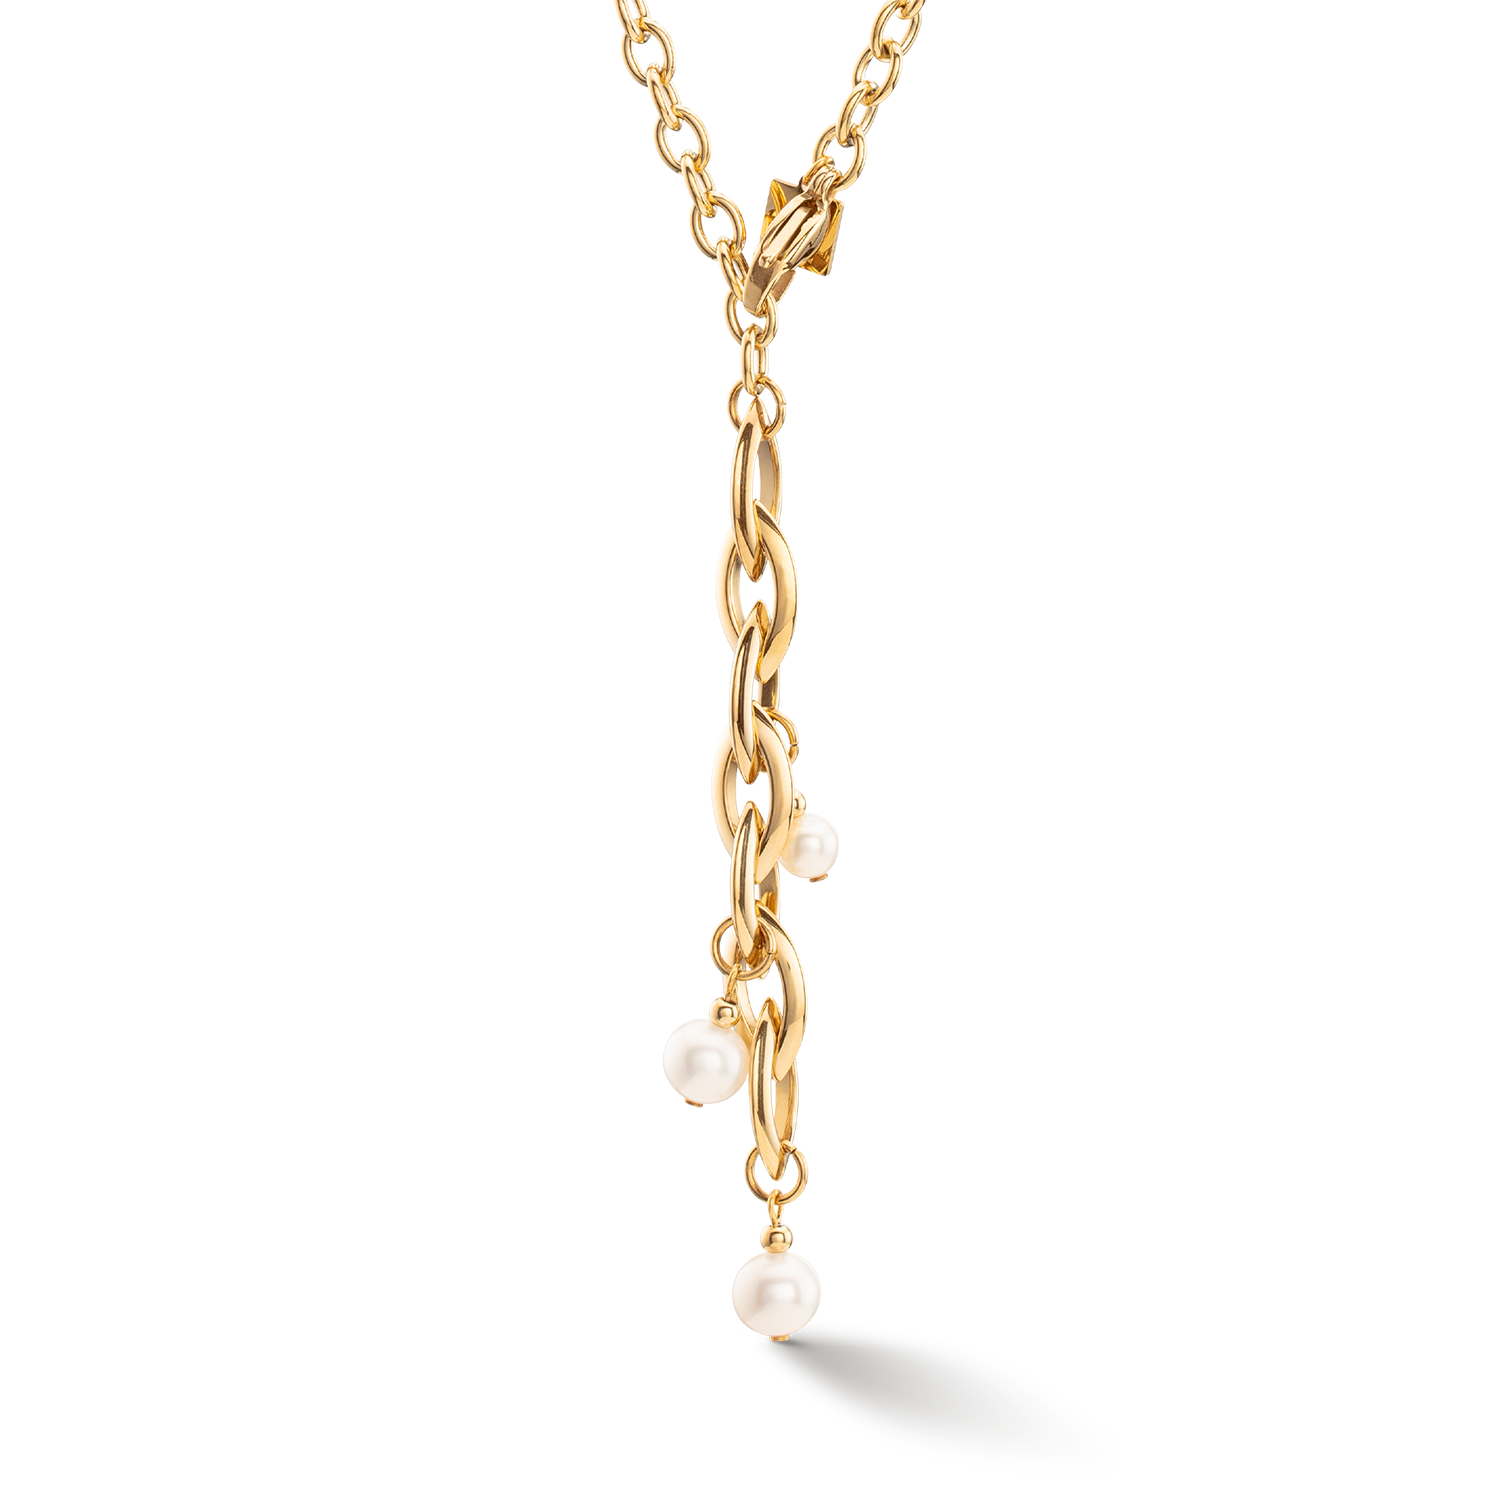 Necklace Y Navette Freshwater Pearls gold